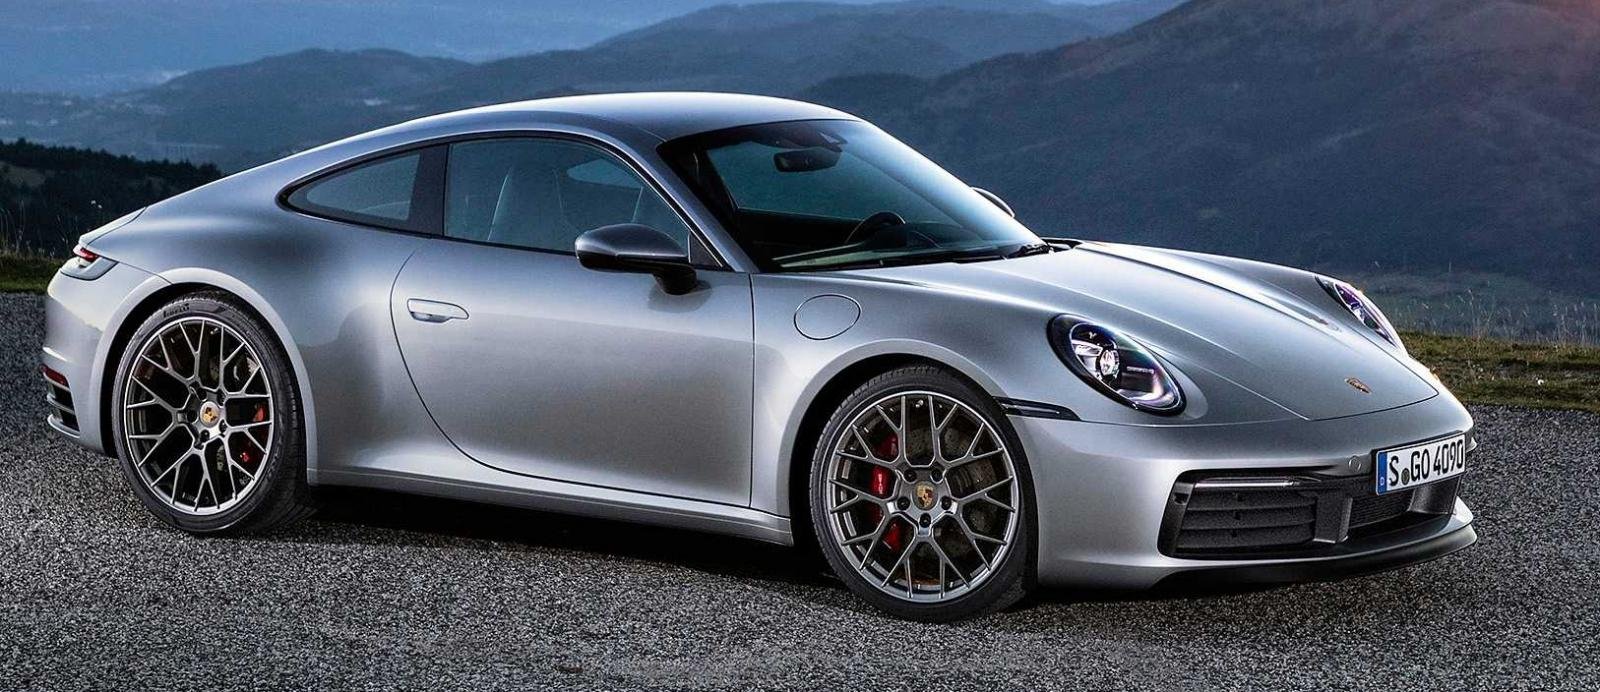 15 Most Expensive Cars in India - Porsche Carrera Coupe